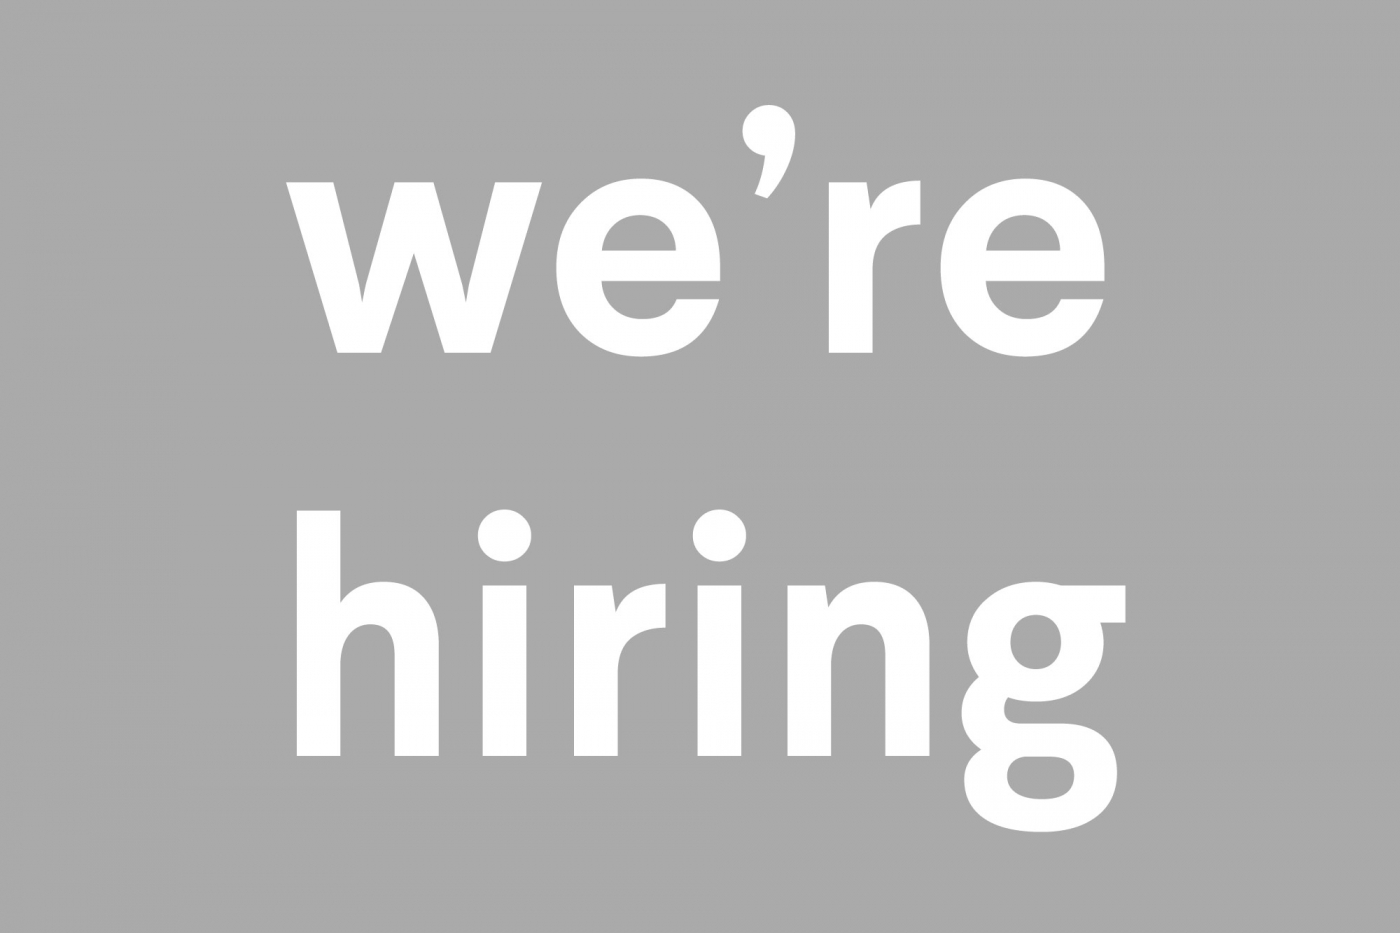 We’re hiring…would you like to join our team in Derry?